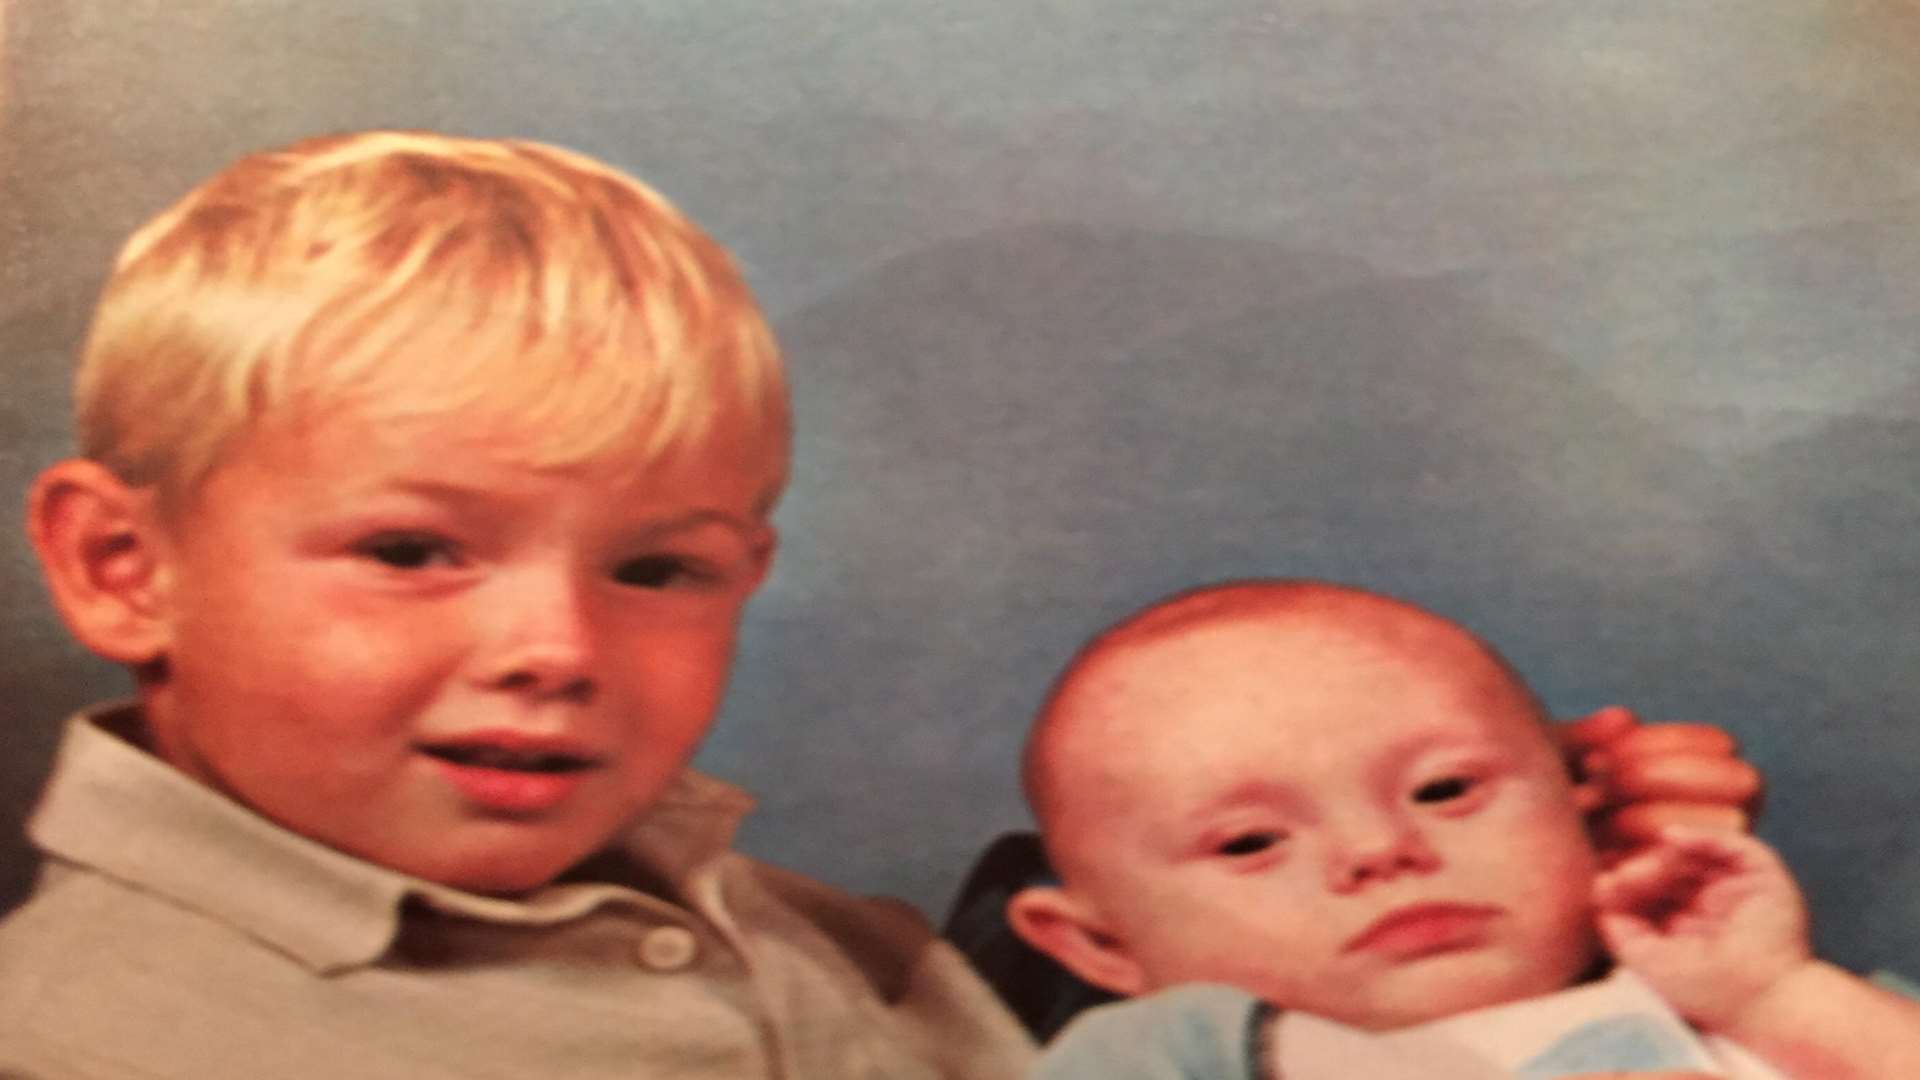 Danny with his brother Sonny when they were younger